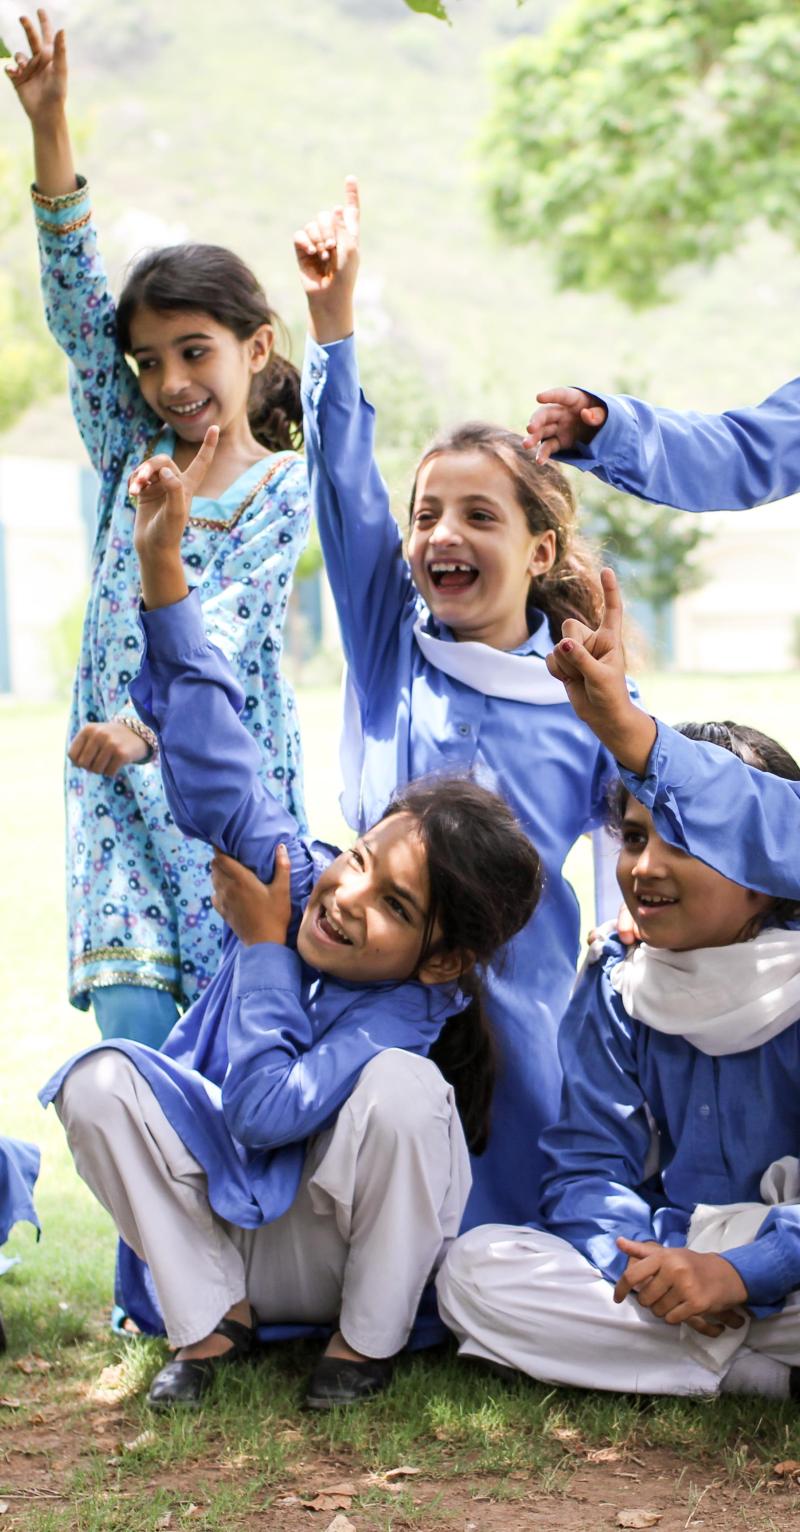 A group of girls in blue tunics with white sashes smile broadly with their hands in the air. Some are seated and some are standing.